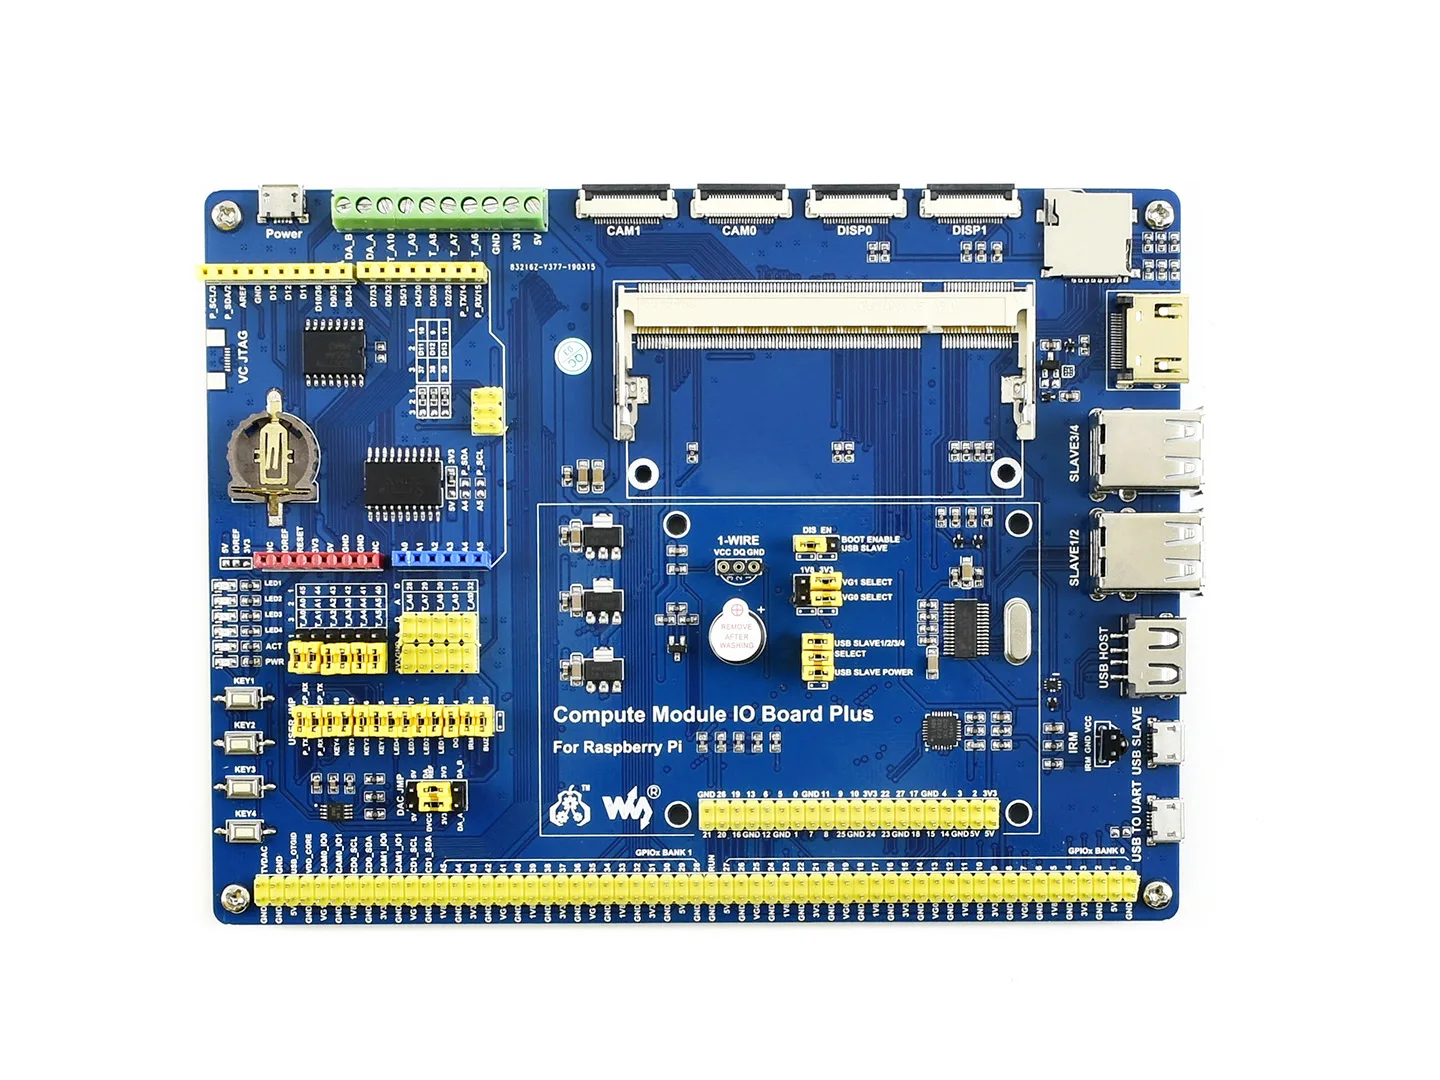 Quickly Raspberry Pi Compute Module 3 with 16GB eMMC Flash Development kit B for You to Evaluate The Compute Module 3 reducing Your Development Cycle.